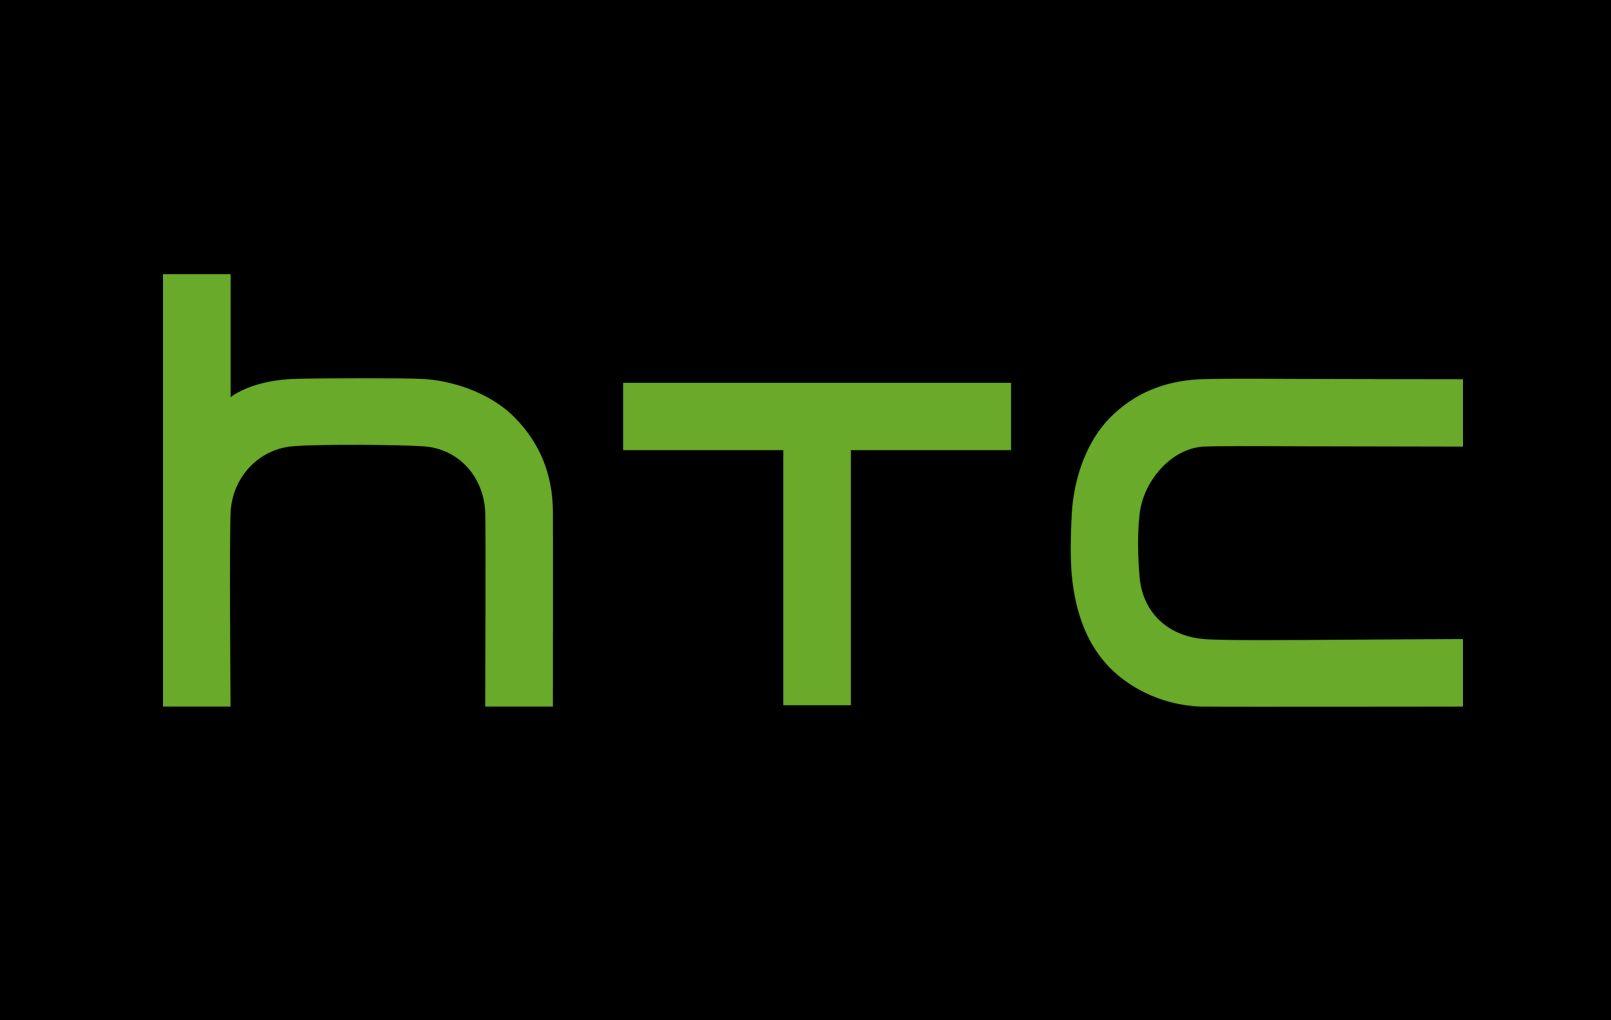 HTC Logo - HTC Logo, HTC Symbol Meaning, History and Evolution